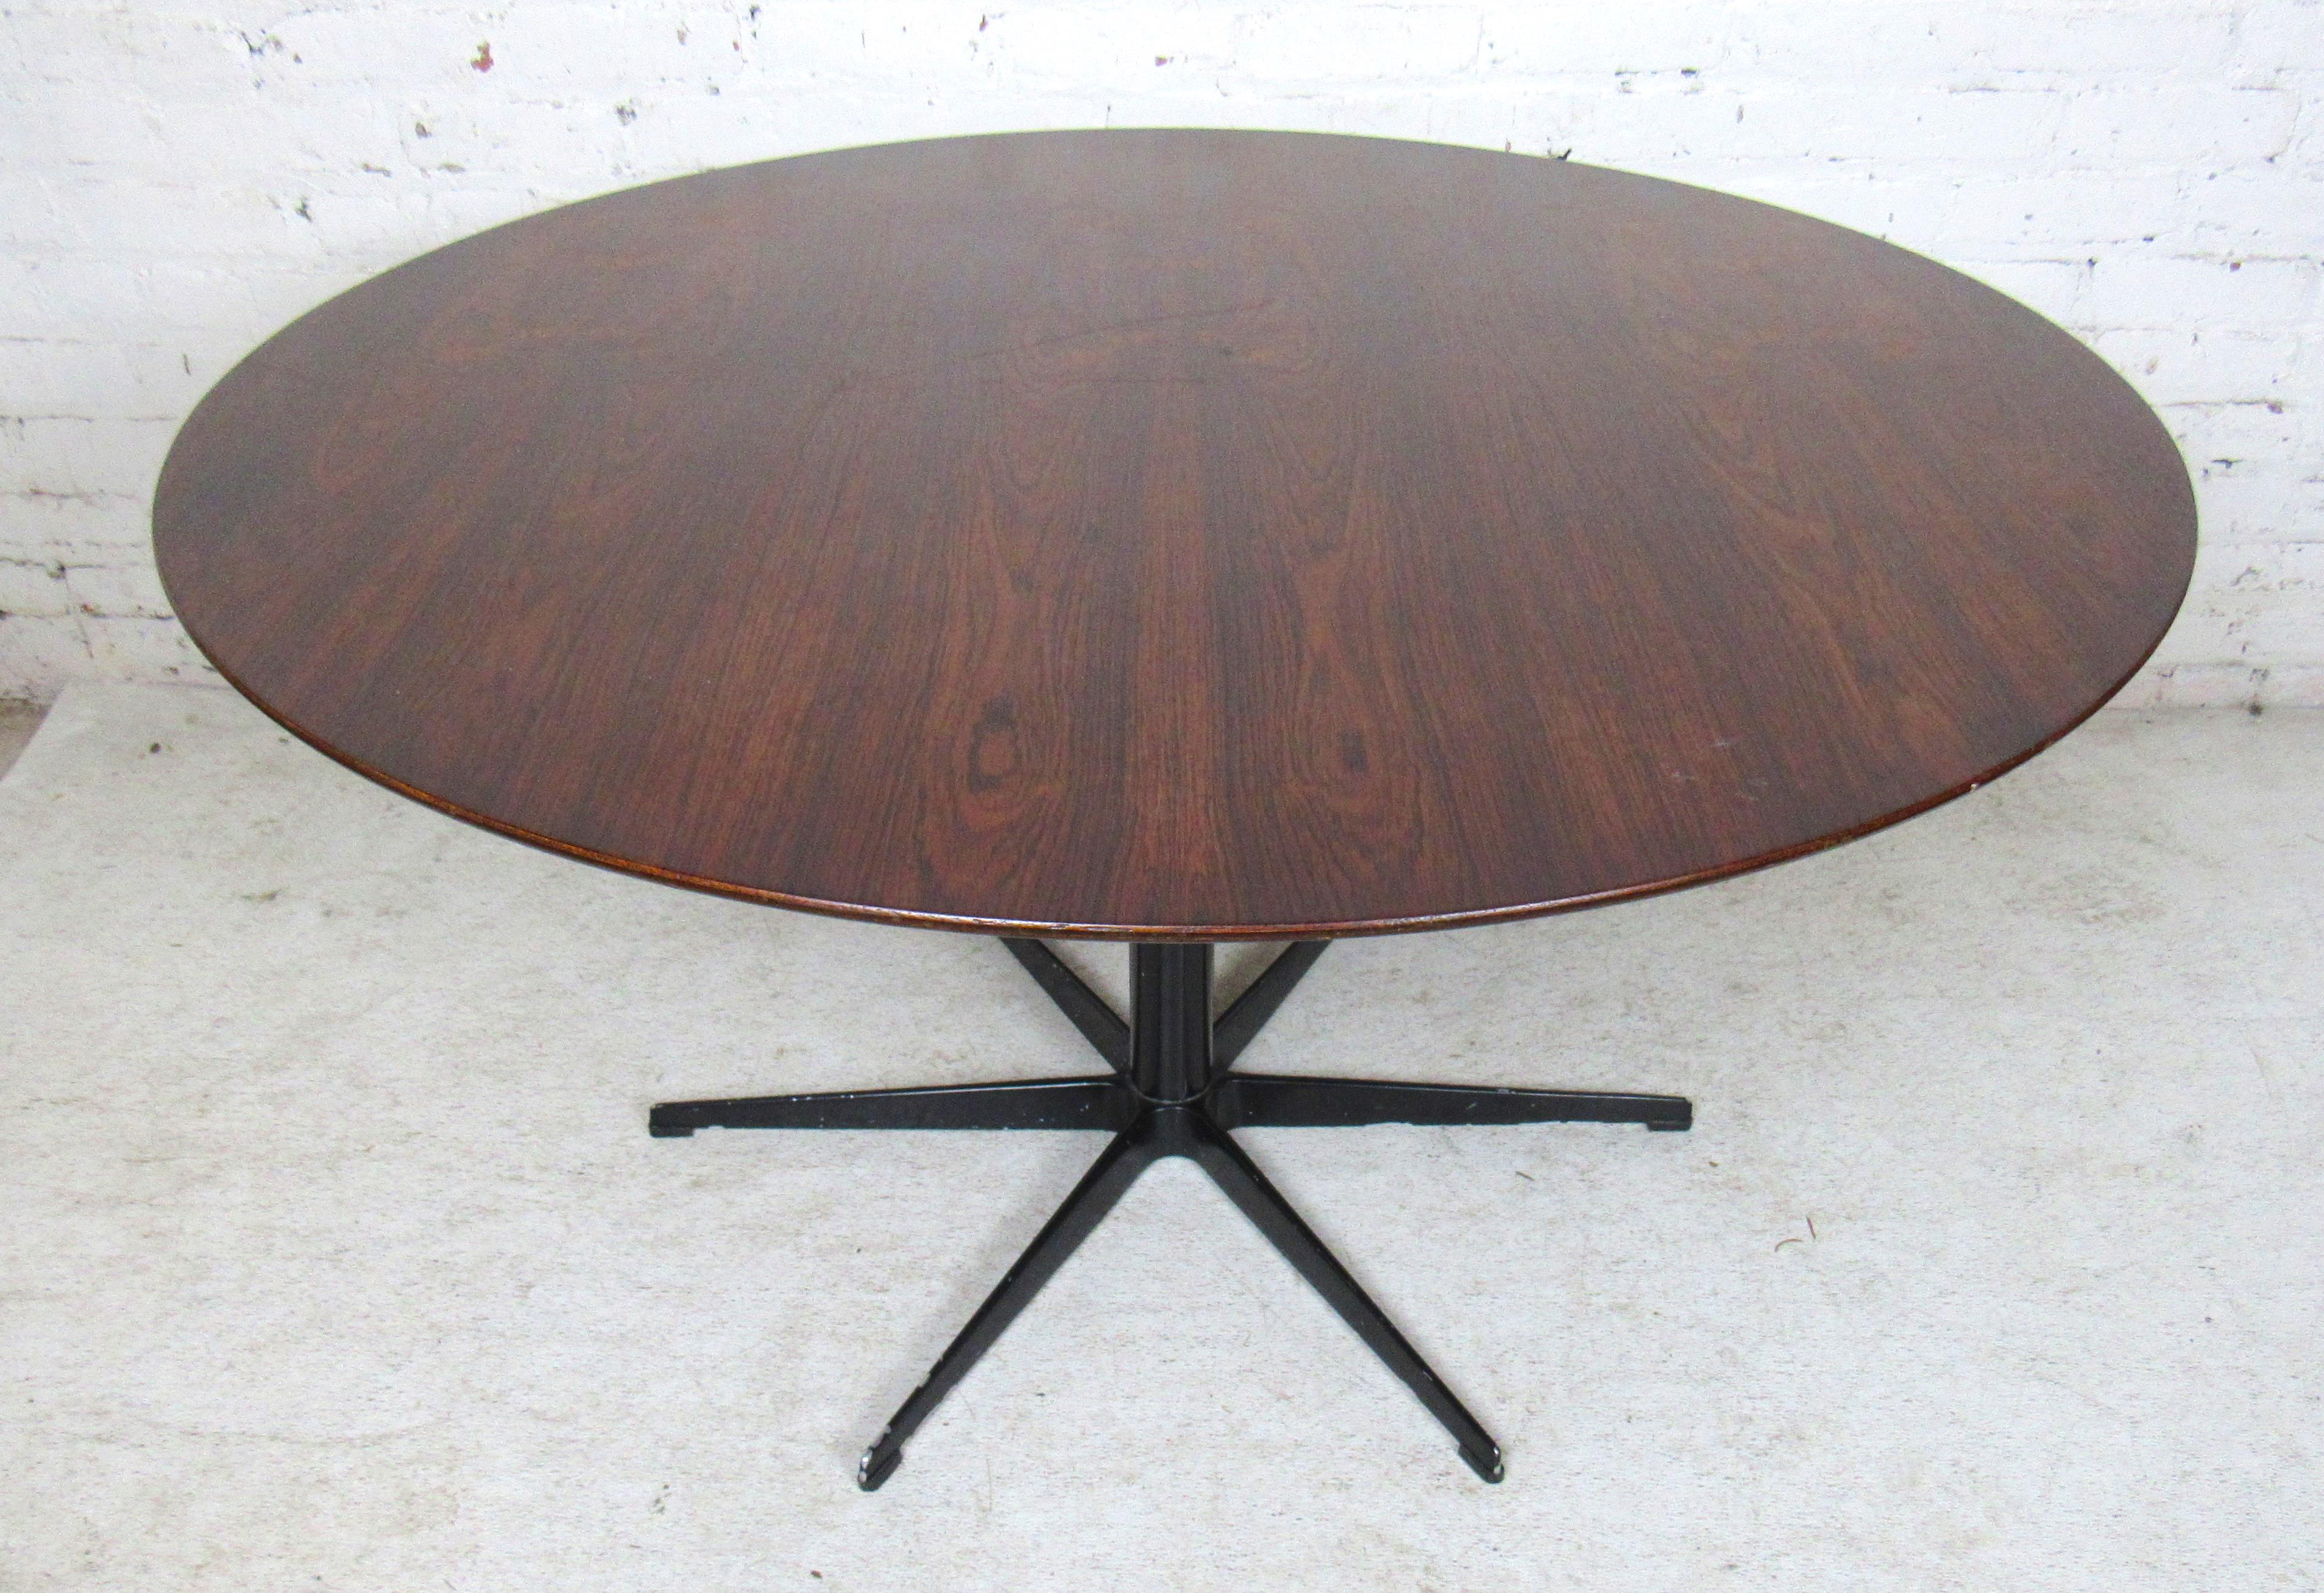 Mid-Century Modern round rosewood dining table with black metal star base.
(Please confirm item location - NY or NJ - with dealer).
   